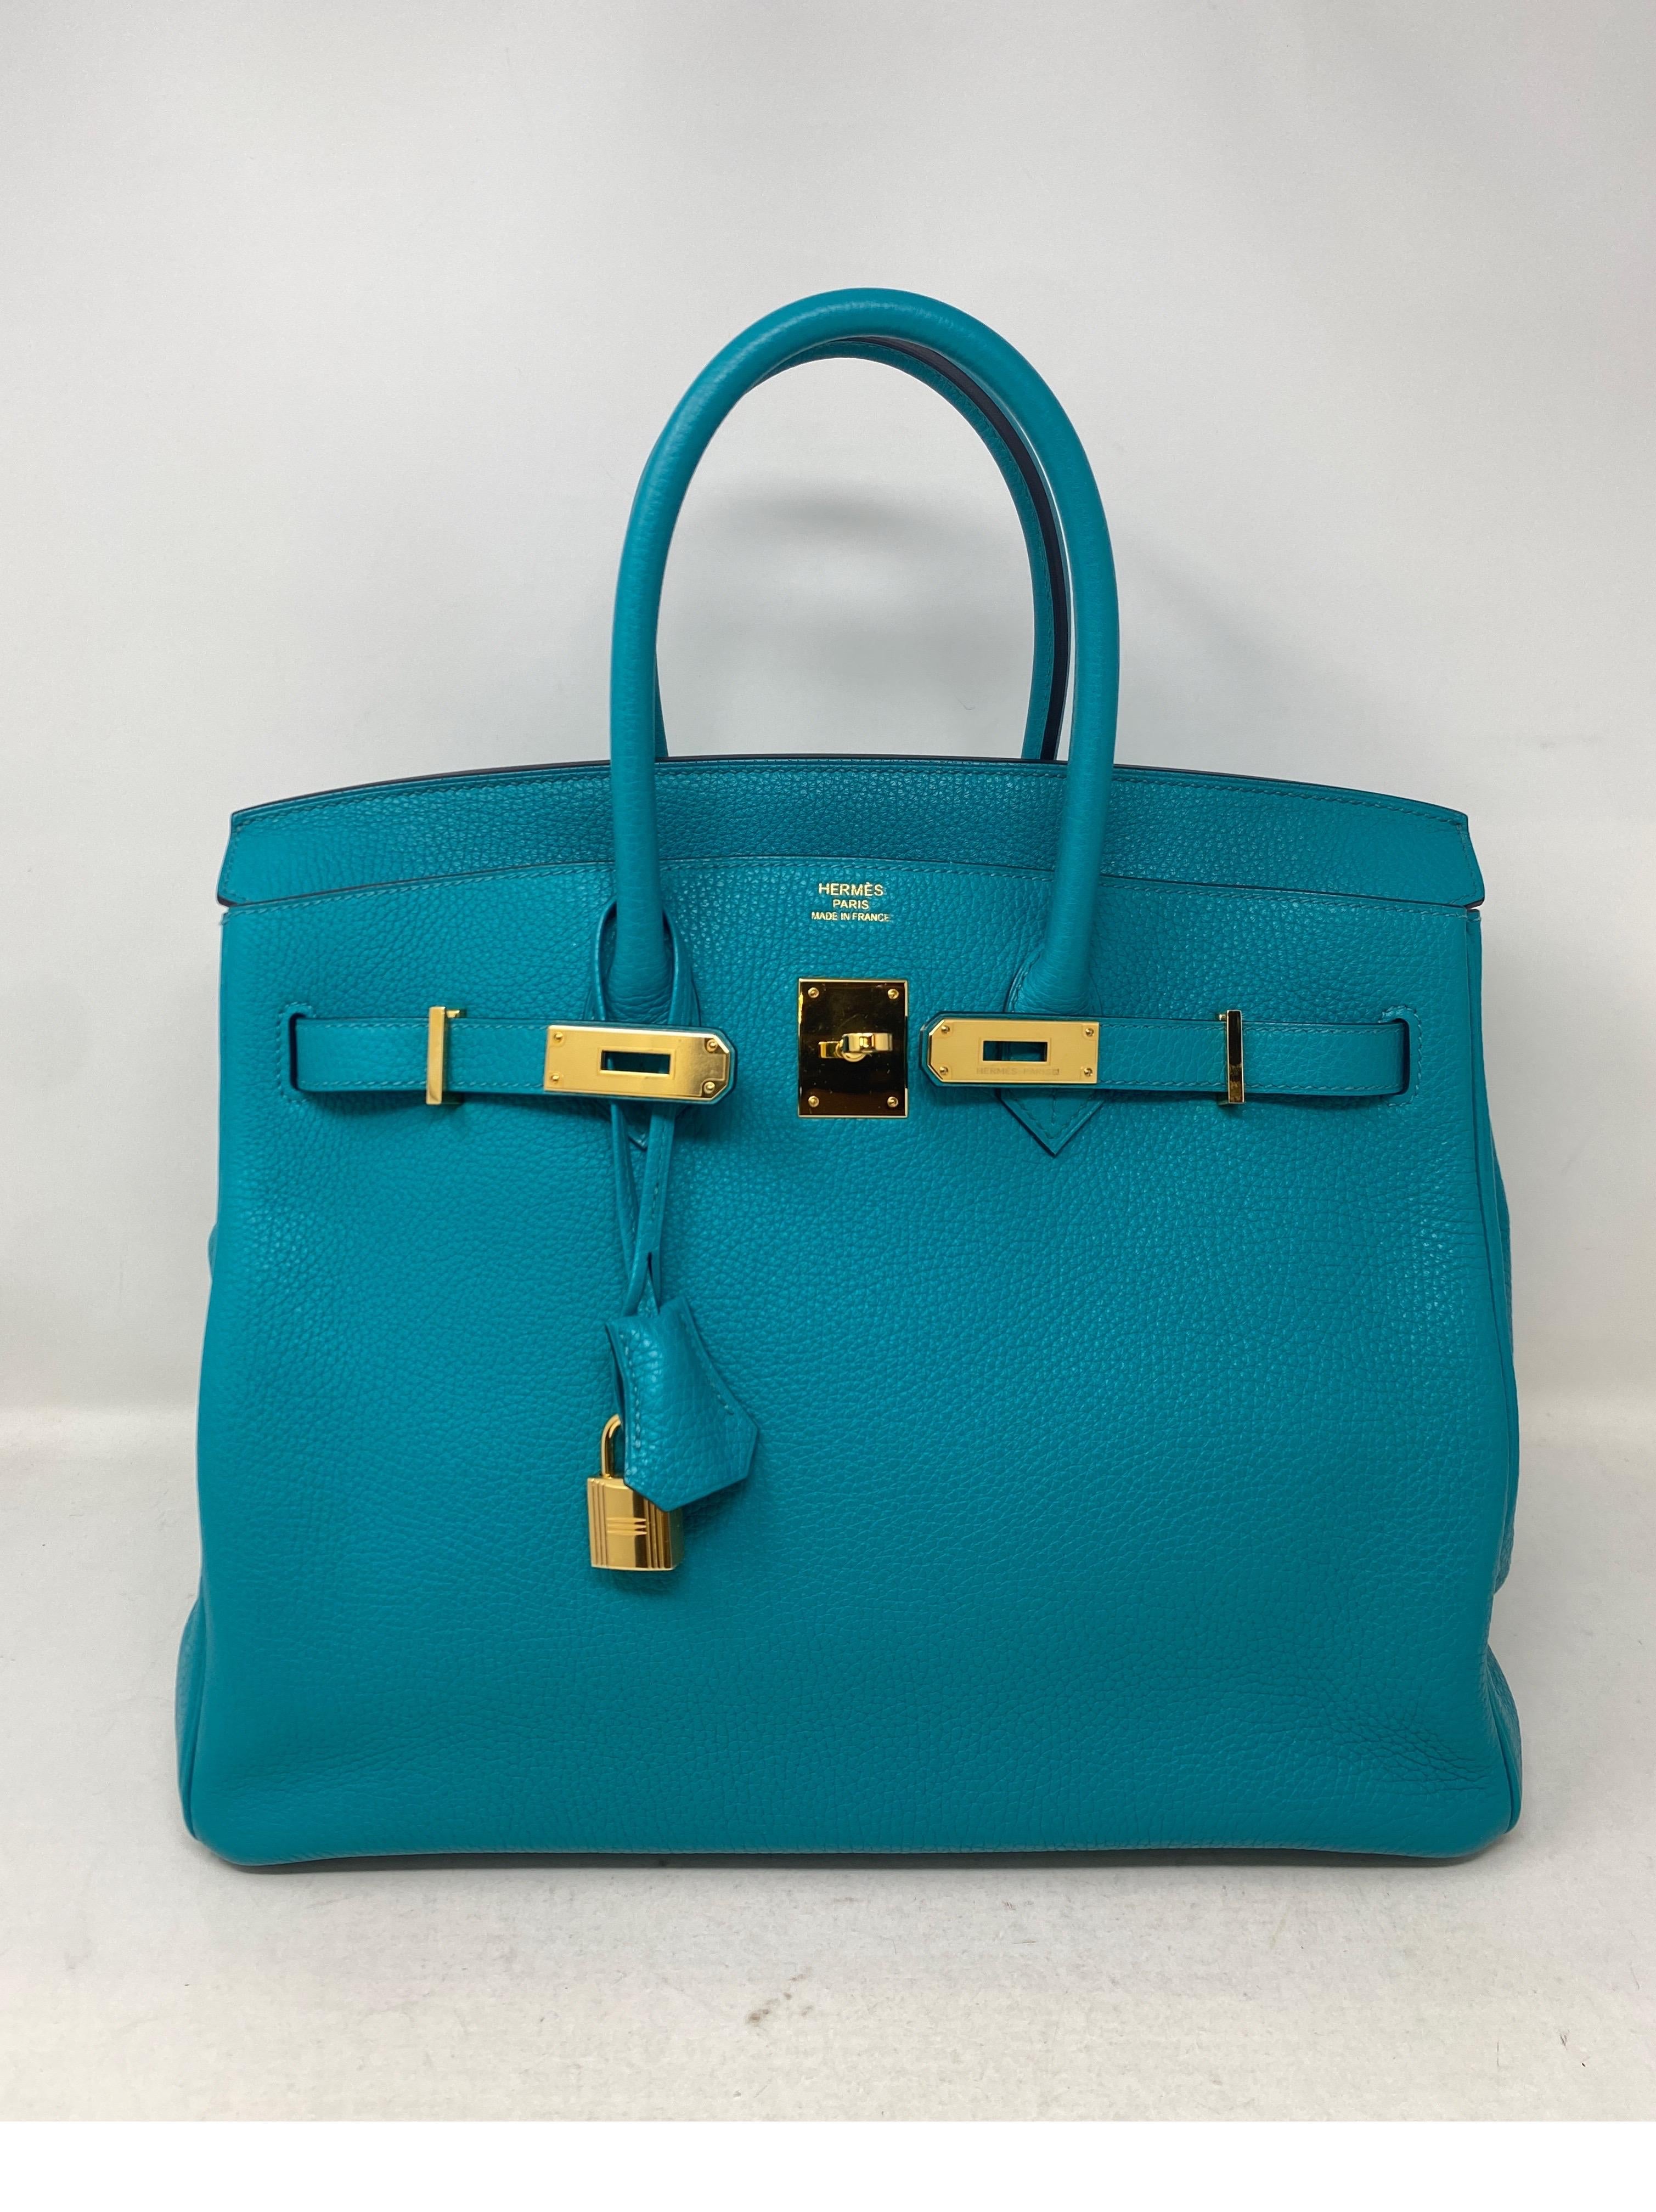 Hermes Blue Paon Birkin 35 Bag. Excellent like new condition. Like brand new. Beautiful teal blue color with gold hardware. Includes clochette, lock, keys, and dust cover. Guaranteed authentic. 